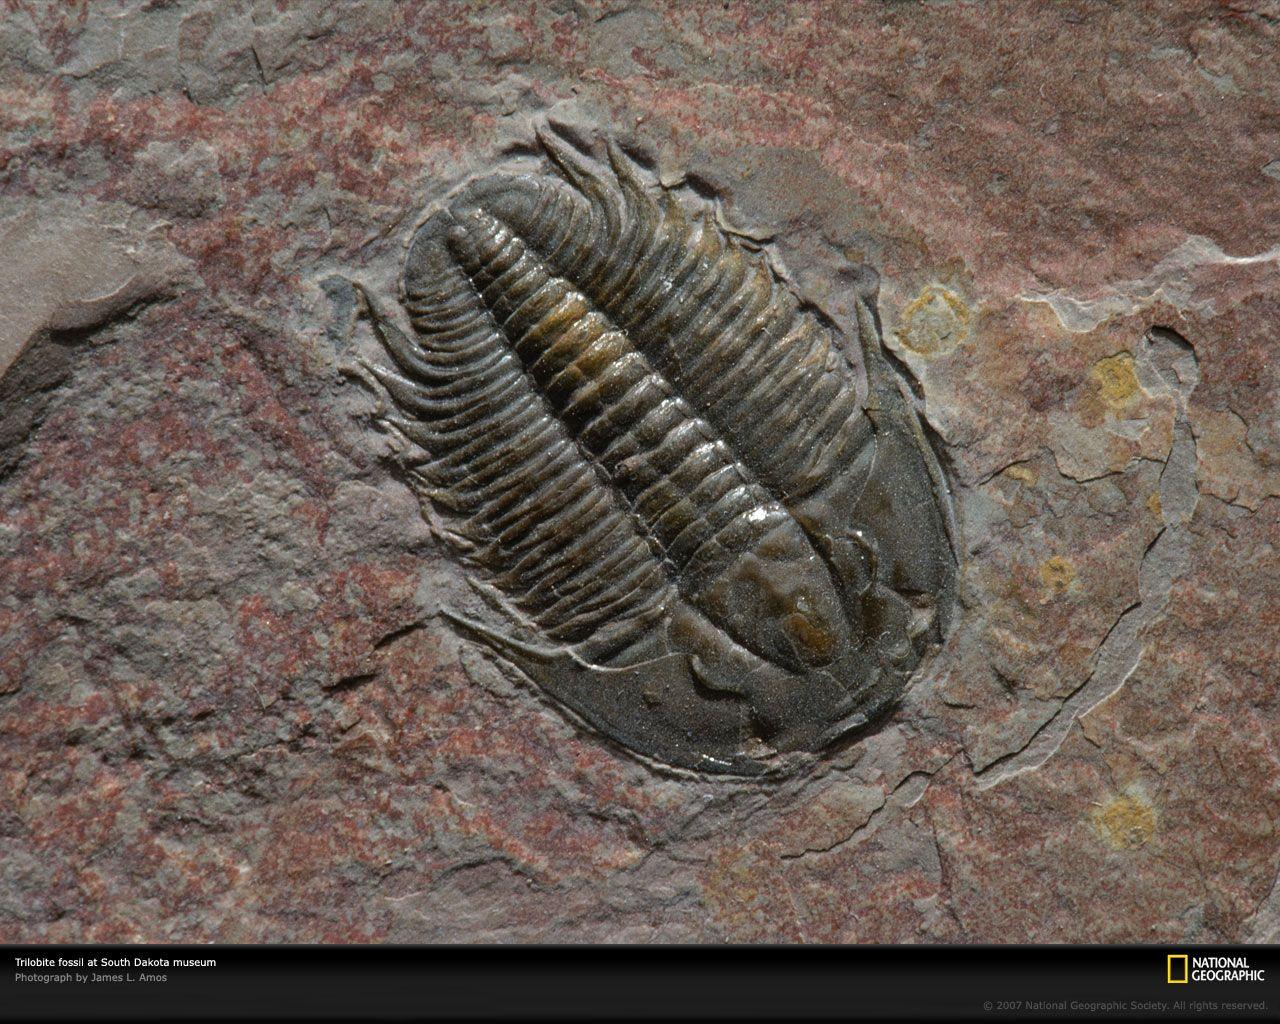 Fossil Wallpaper, HD Image Fossil Collection, GuoGuiyan Wallpaper